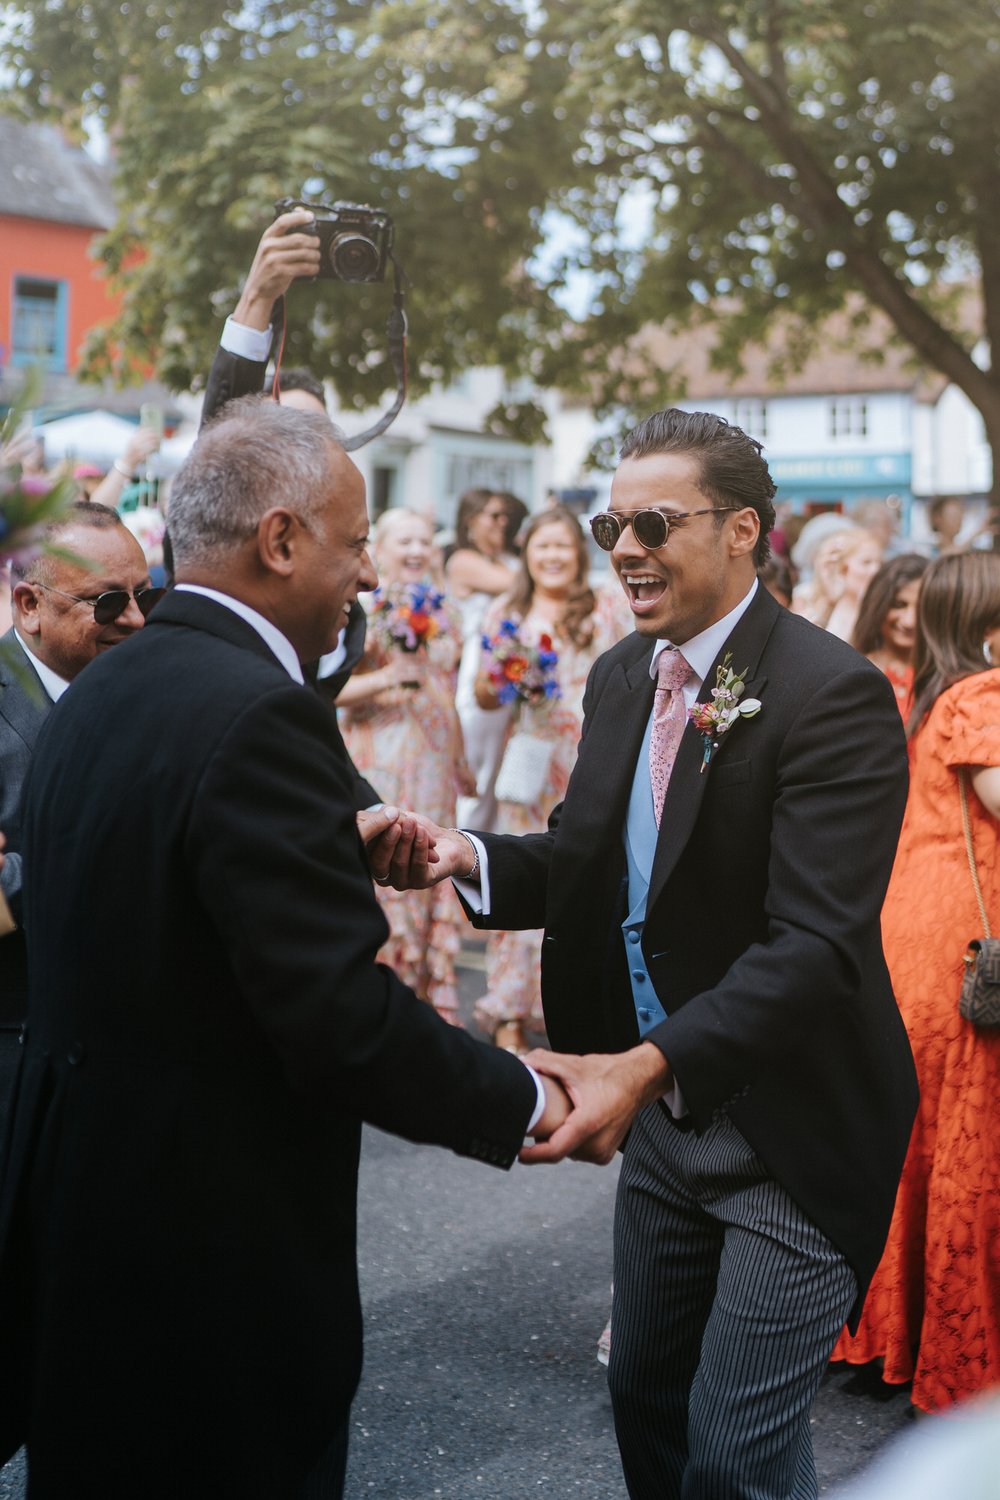 Bride's brother and father share a moment of joy as they dance during wedding day baraat